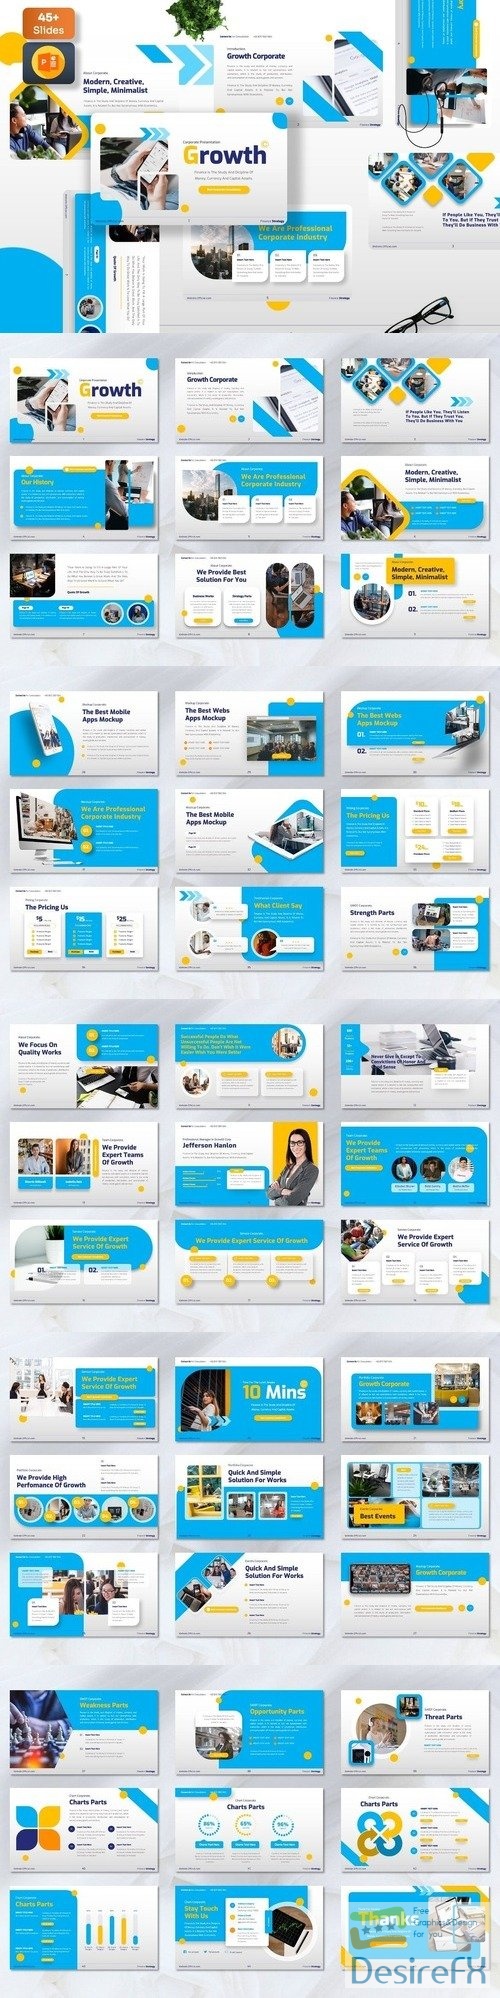 Growth - Corporate Powerpoint Templates